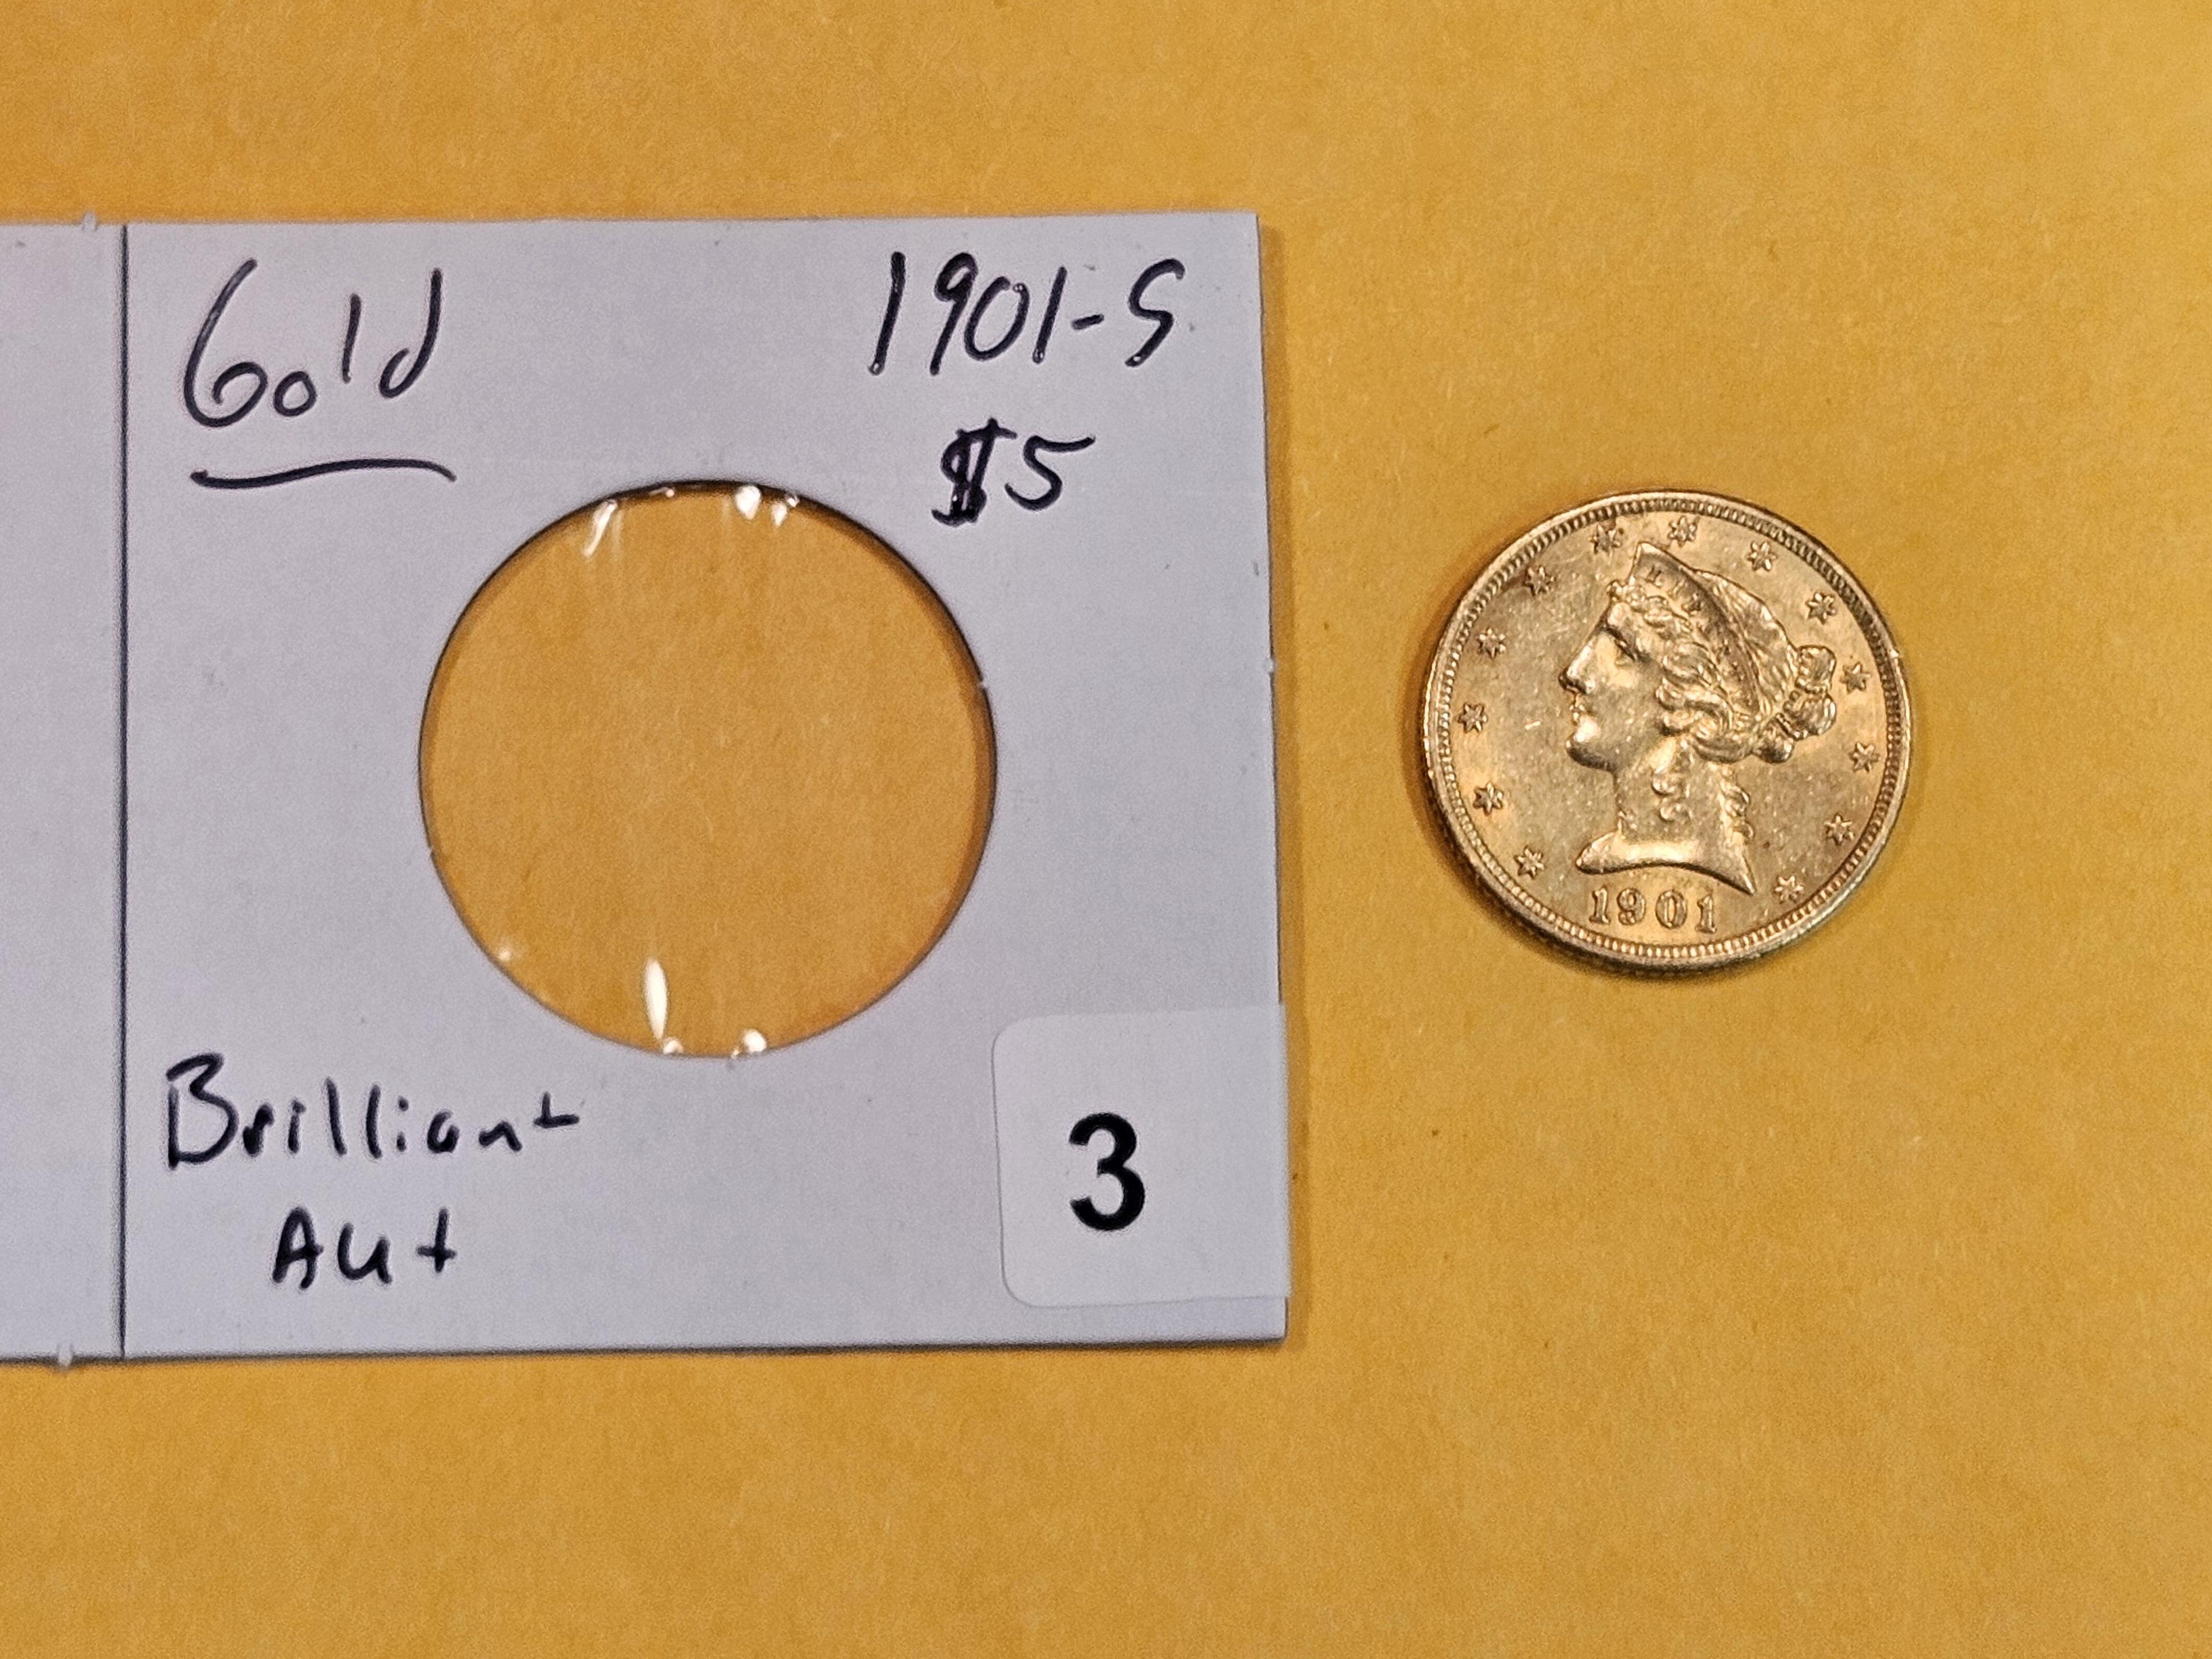 GOLD! Brilliant About Uncirculated plus 1901-S Gold Liberty Head Five Dollars